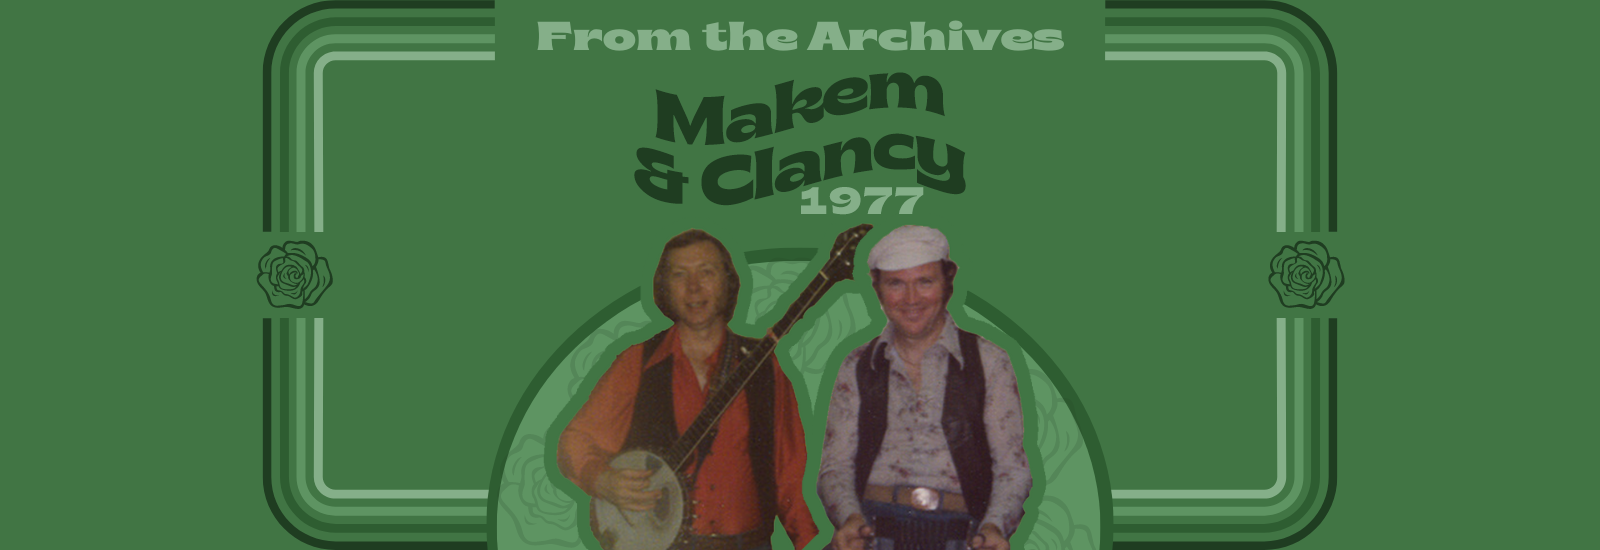 From the Archives: Makem and Clancy 1977, hosted by Rory Makem